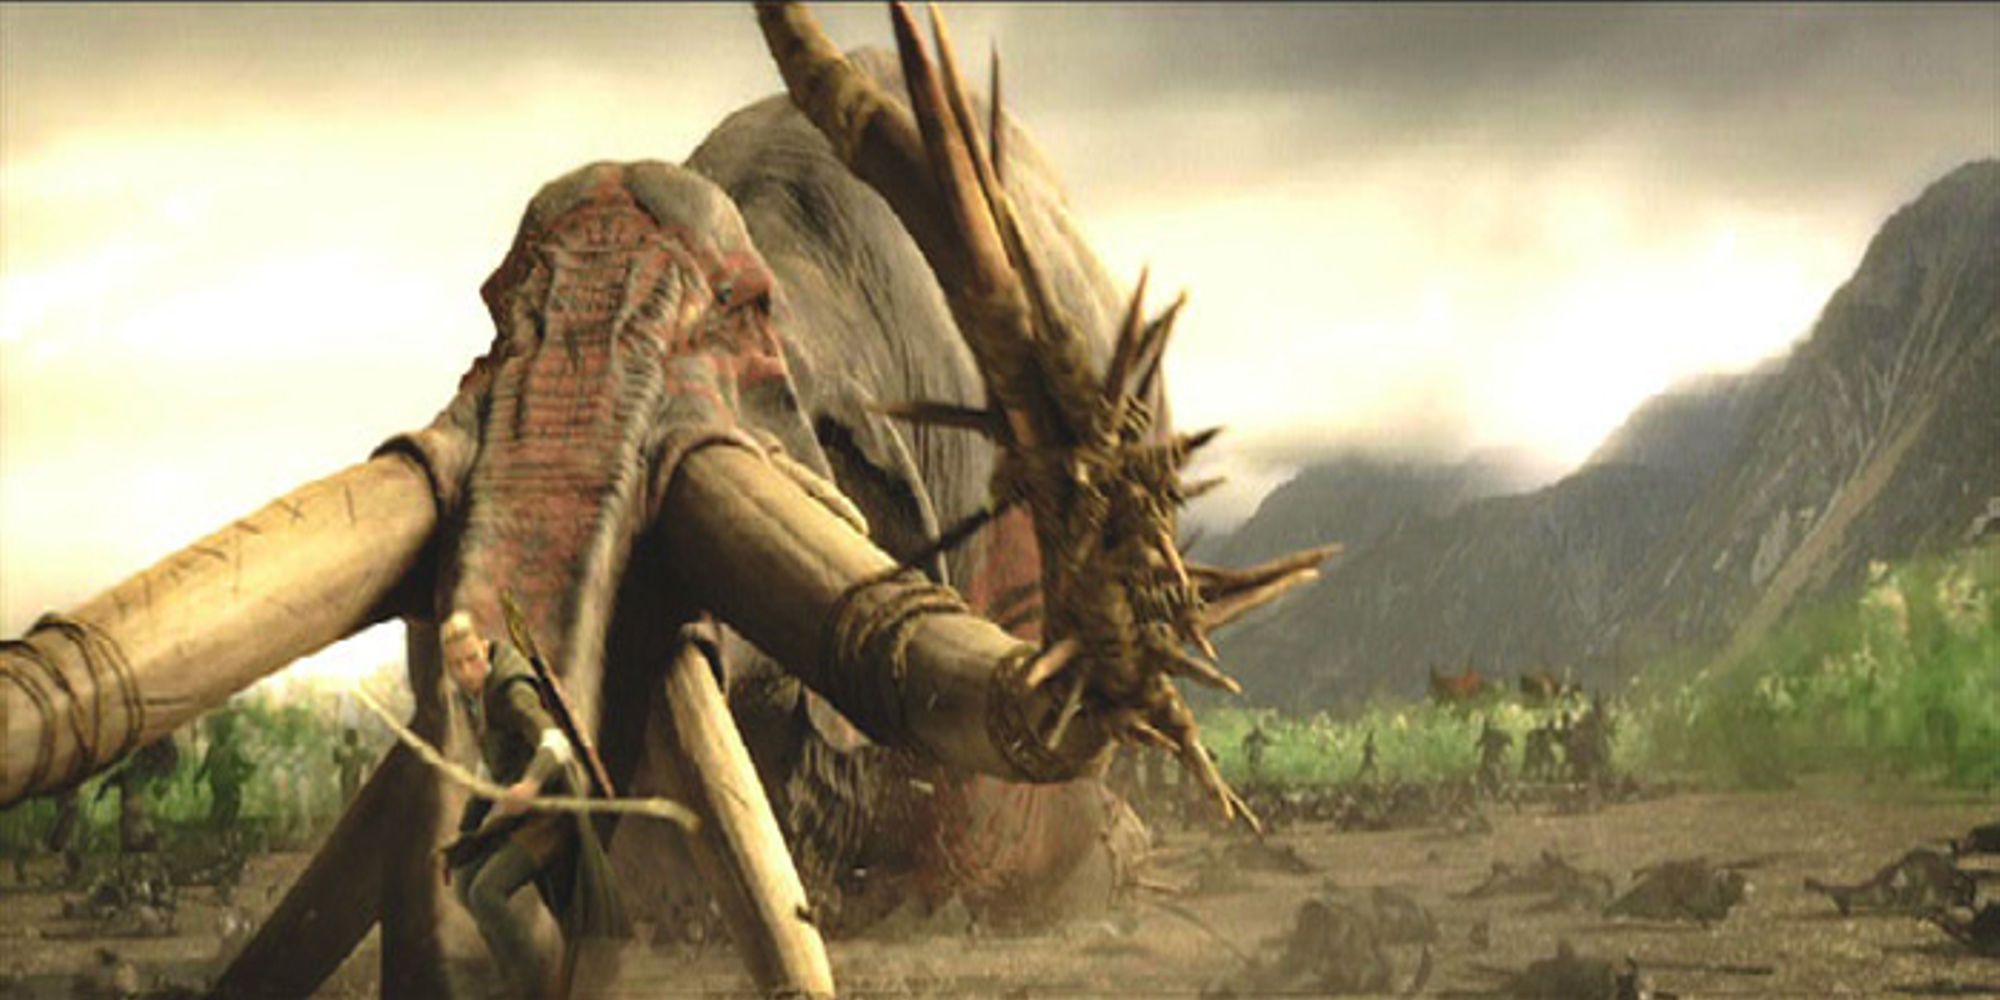 Legolas slides down the trunk of the mumakil (oliphant) that he just killed